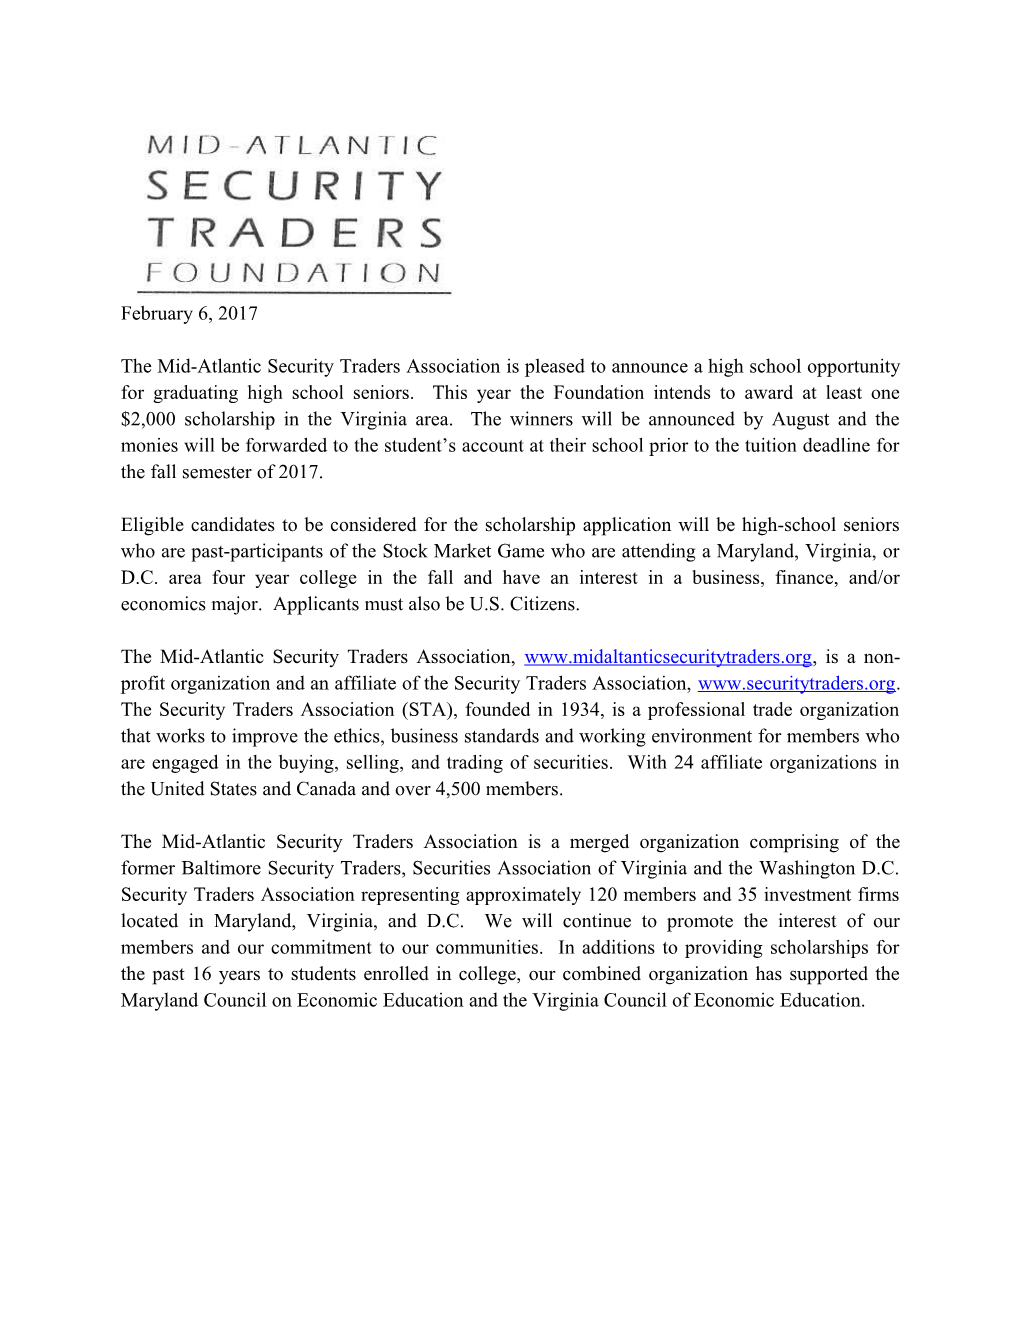 The Mid-Atlantic Security Traders Association Is Pleased to Announce a High School Opportunity